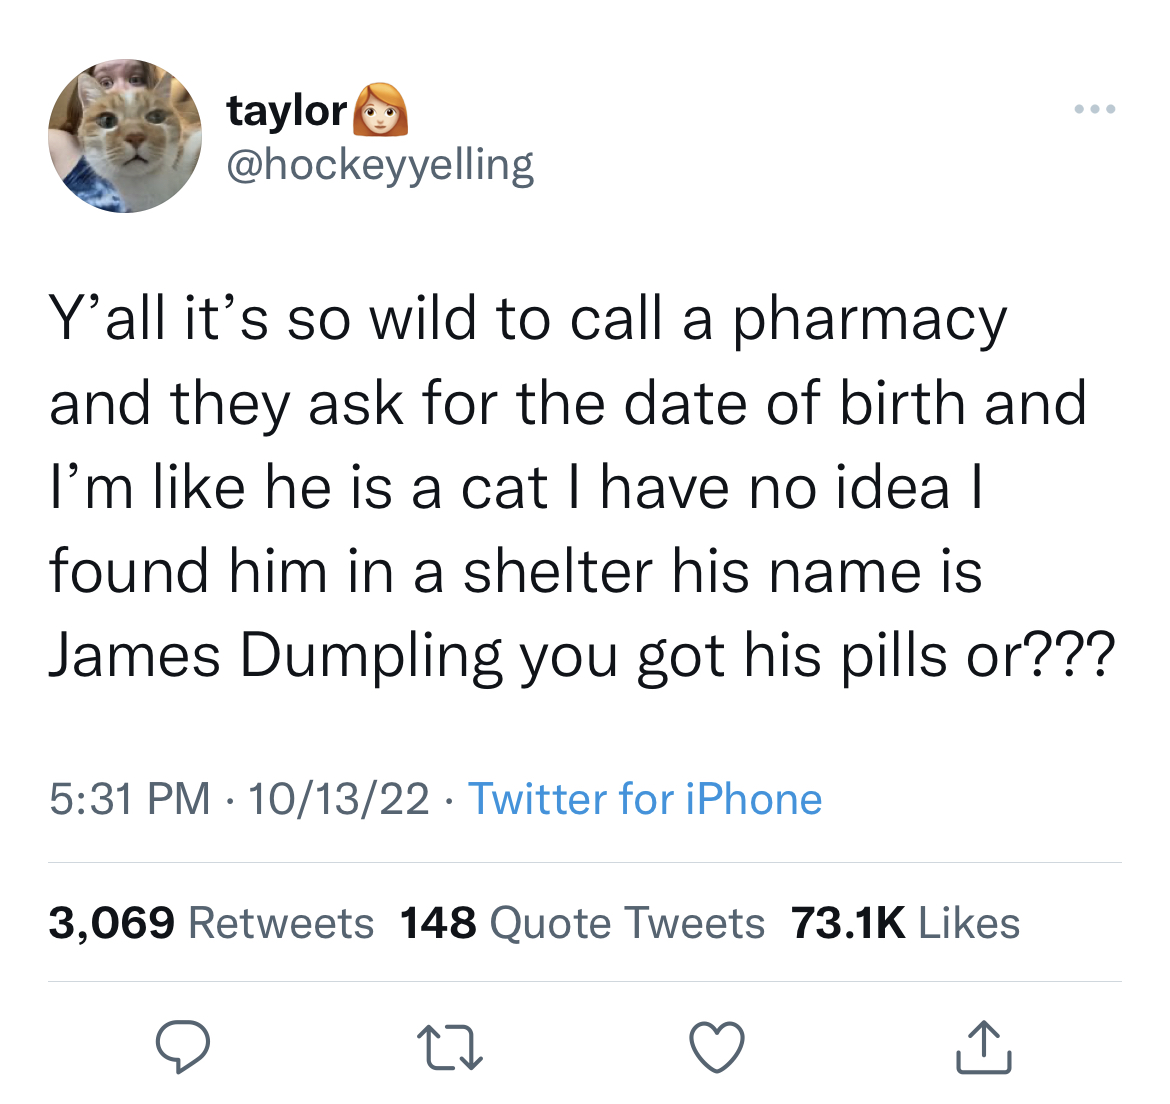 Tweets of the week - angle - taylor Y'all it's so wild to call a pharmacy and they ask for the date of birth and I'm he is a cat I have no idea I found him in a shelter his name is James Dumpling you got his pills or??? 101322 Twitter for iPhone 3,069 148